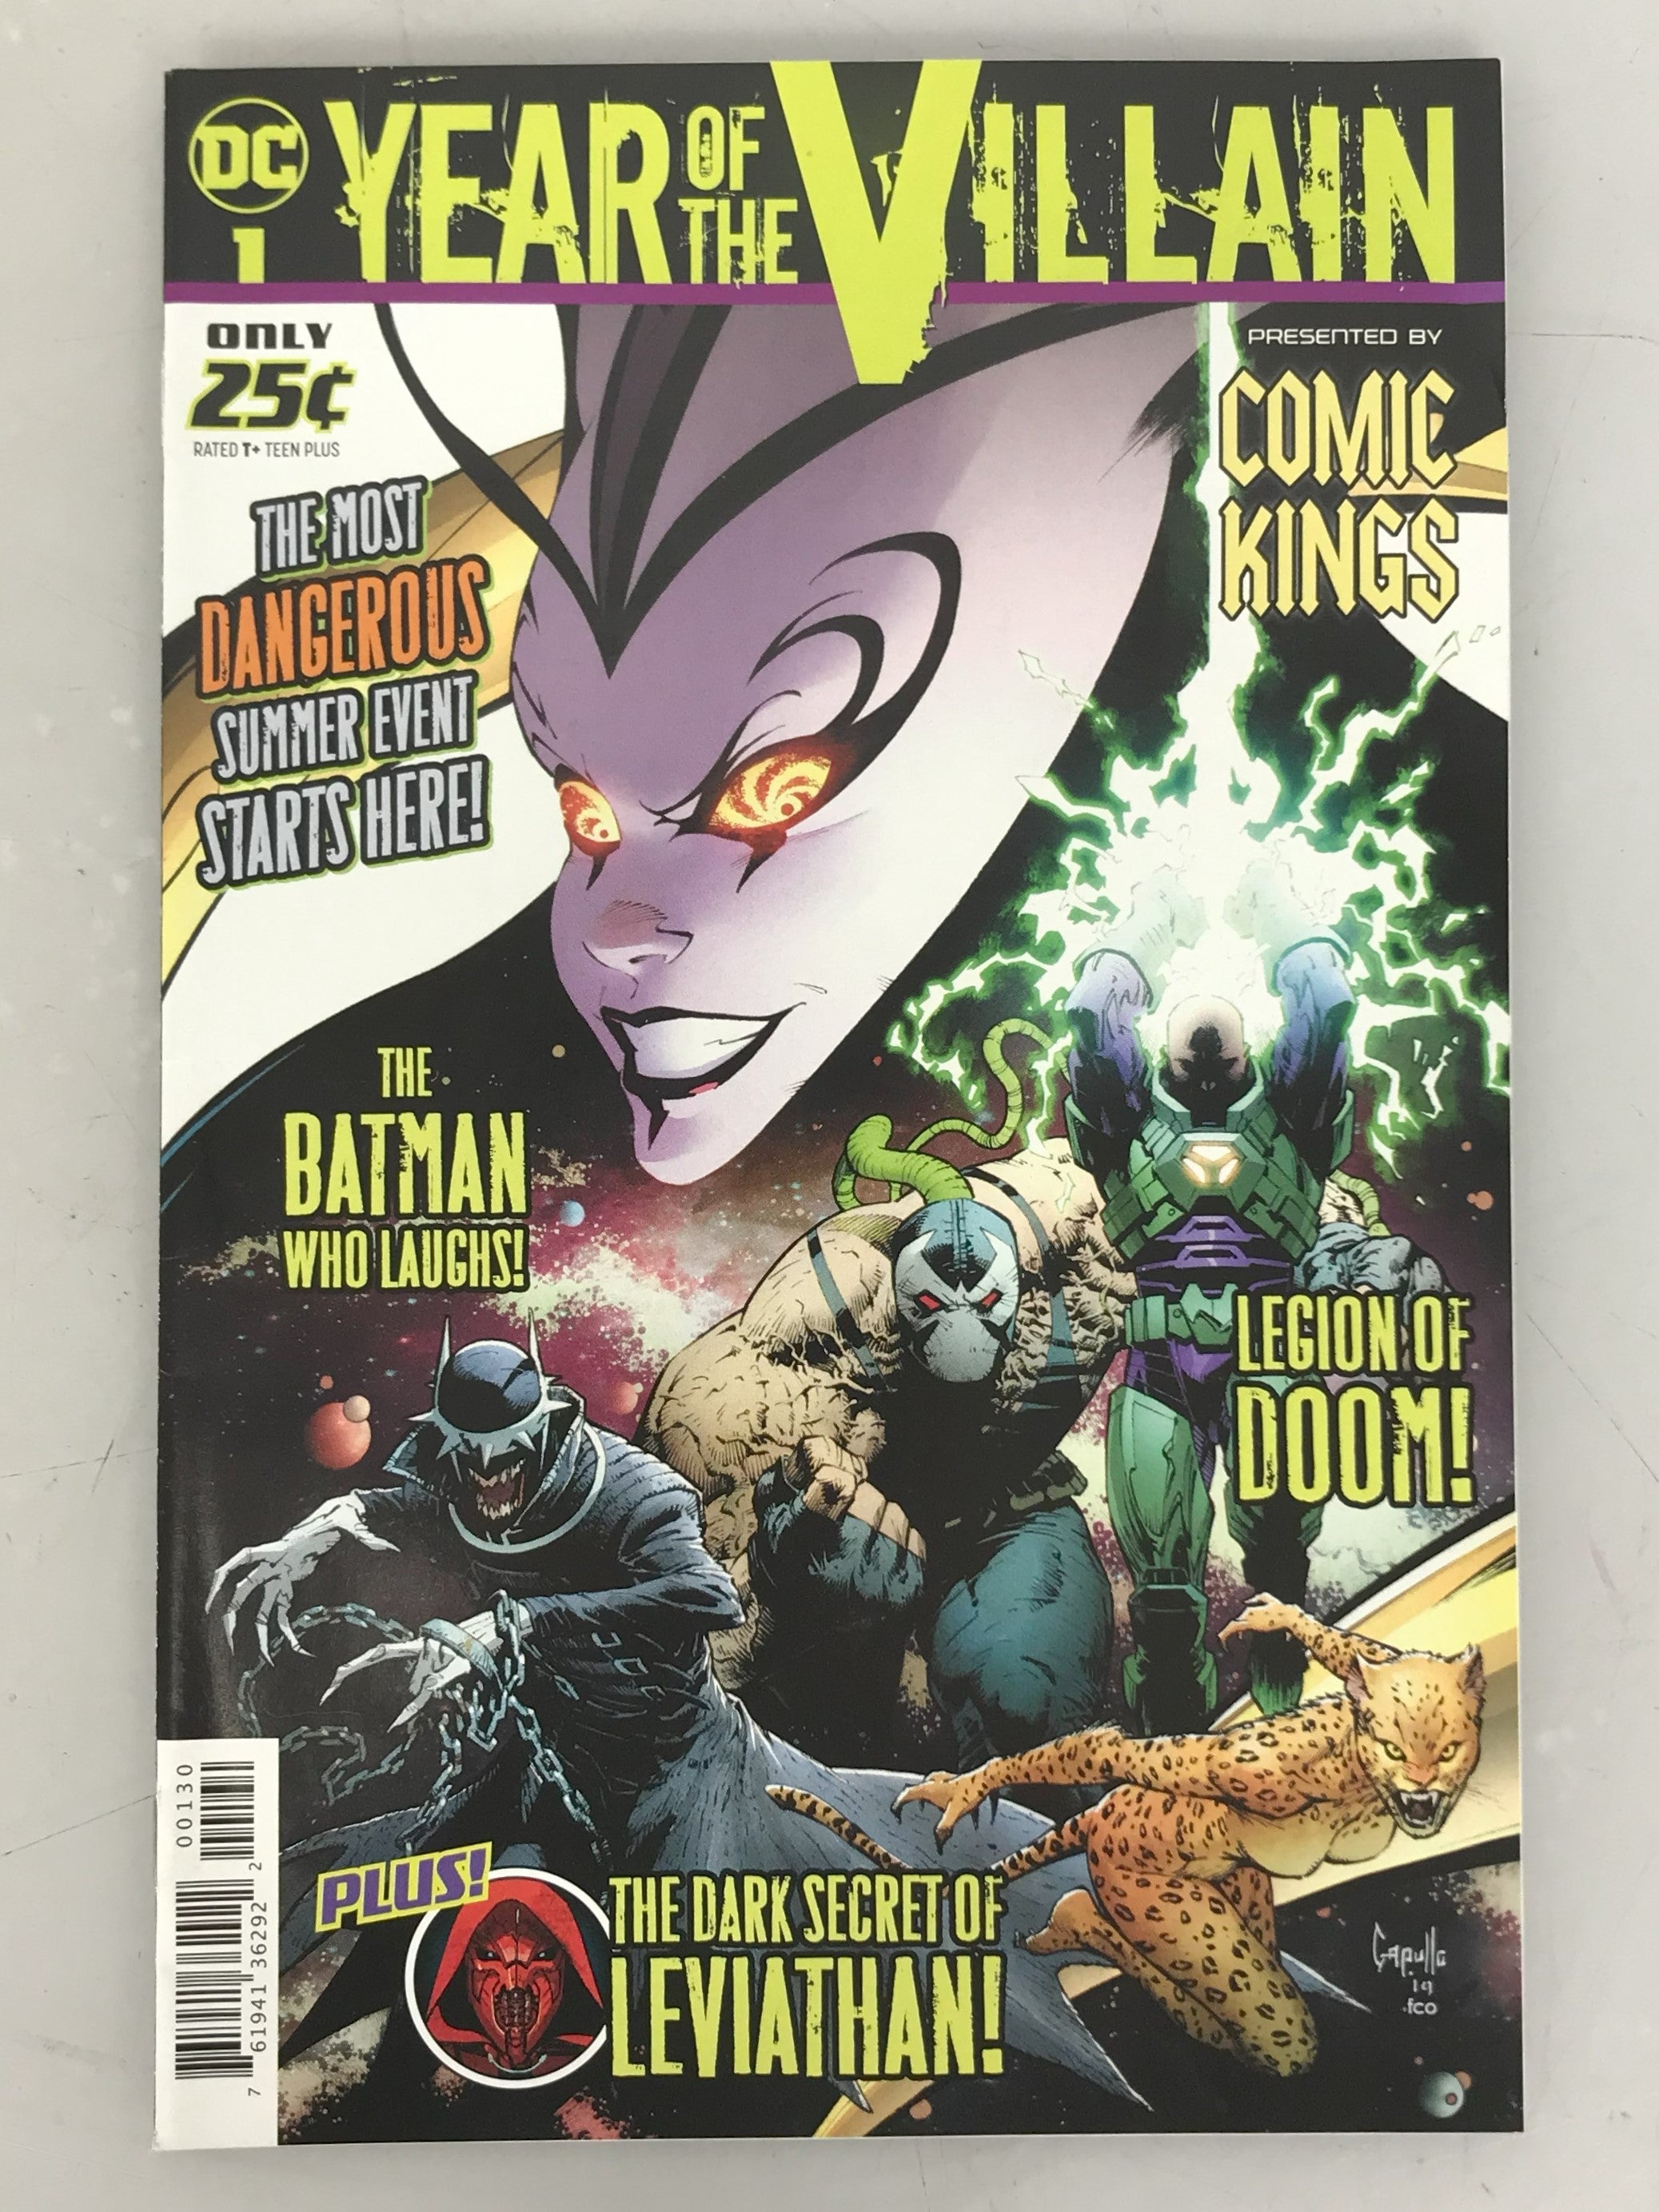 DC'S Year of the Villain Special 1 2019